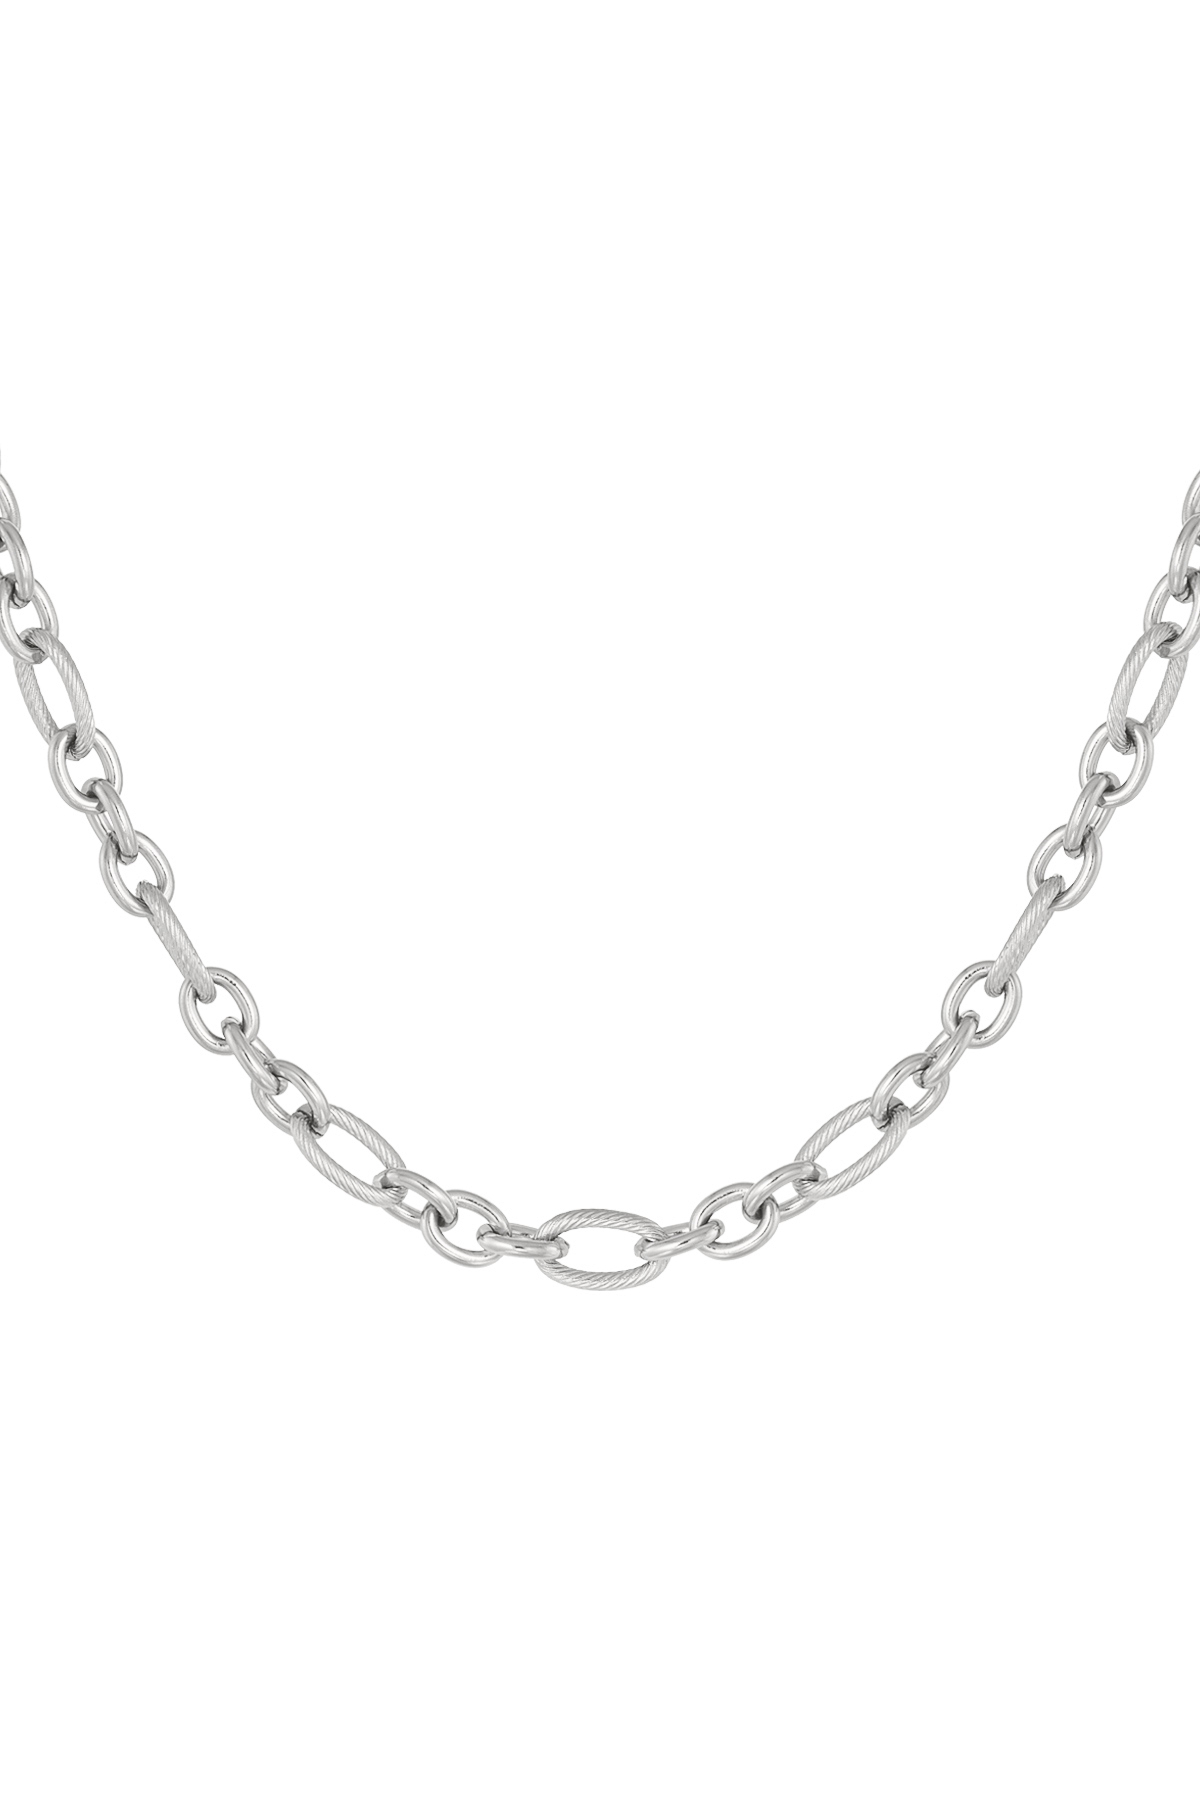 Link chain small and large links - silver h5 